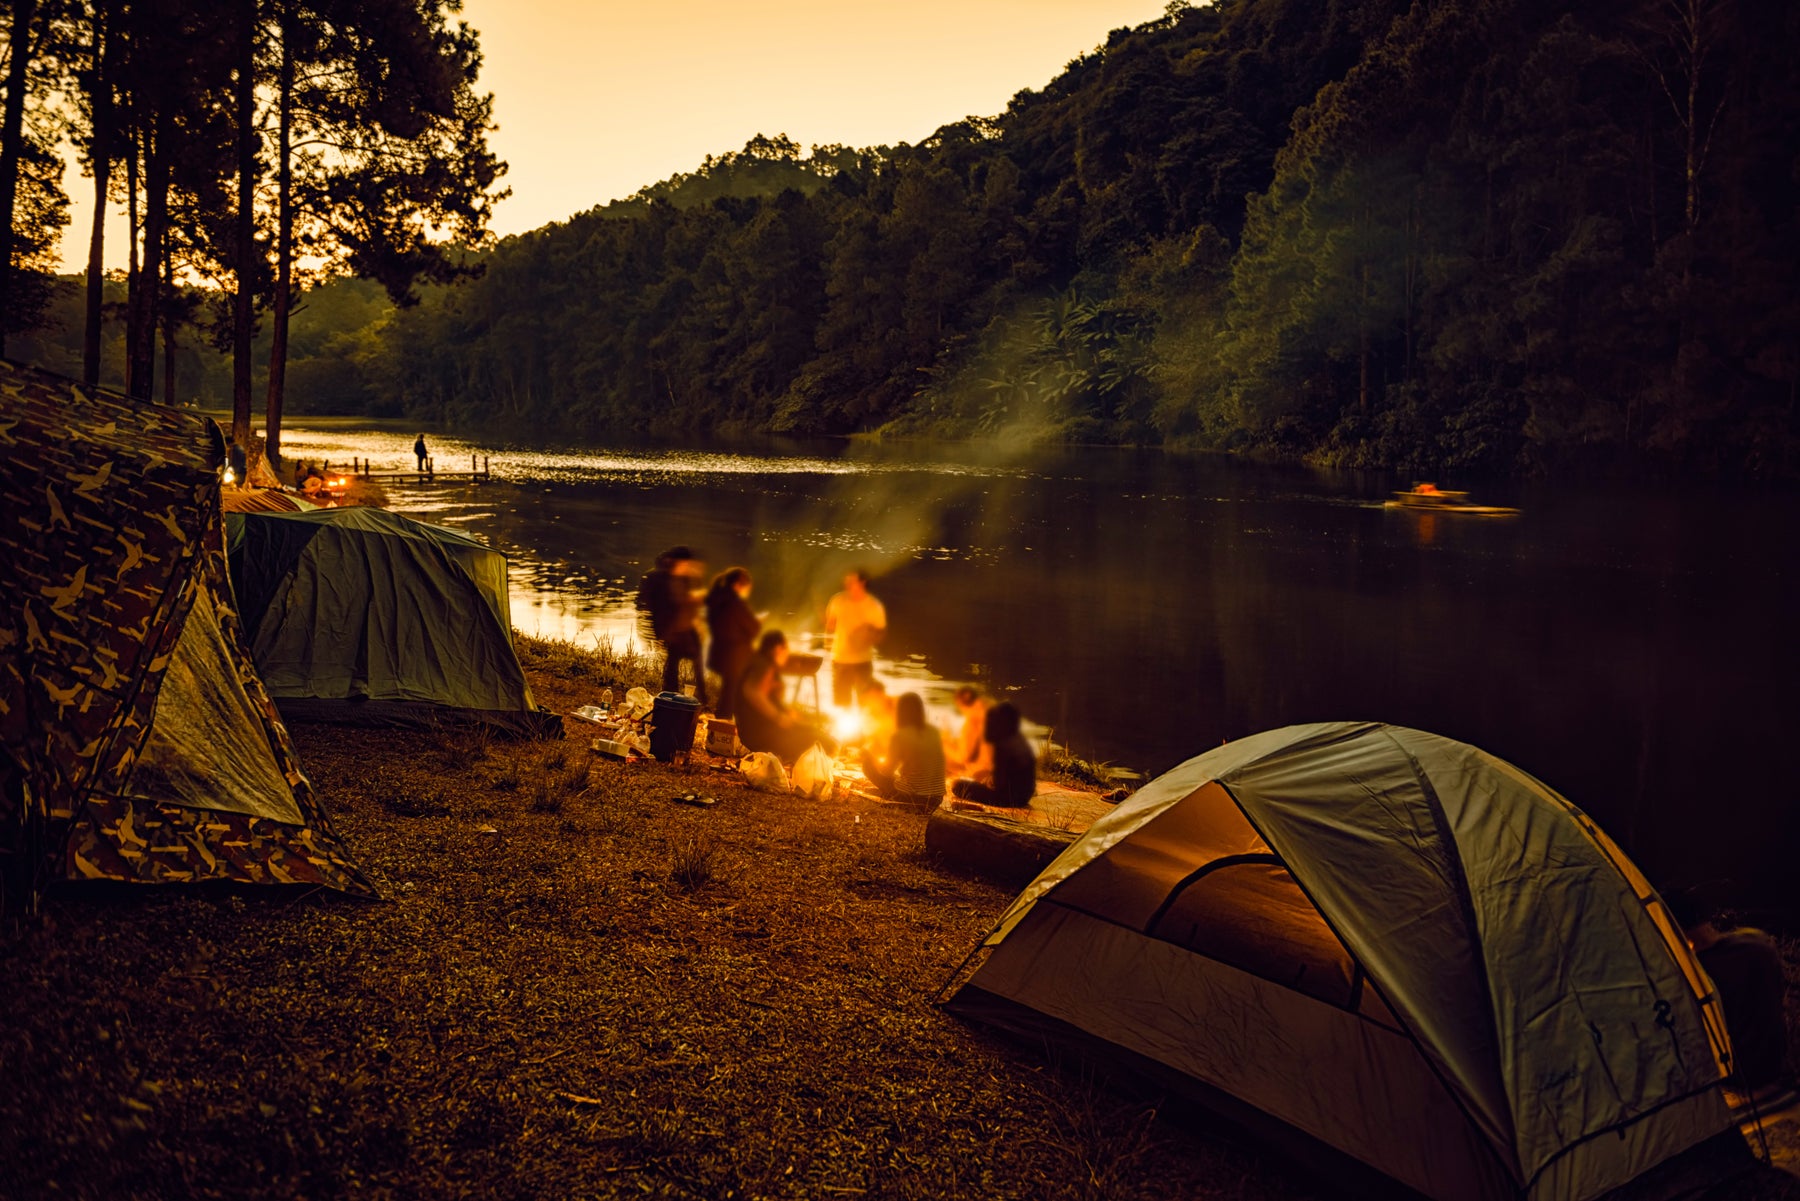 outdoor photo of people around a campfire at dusk.